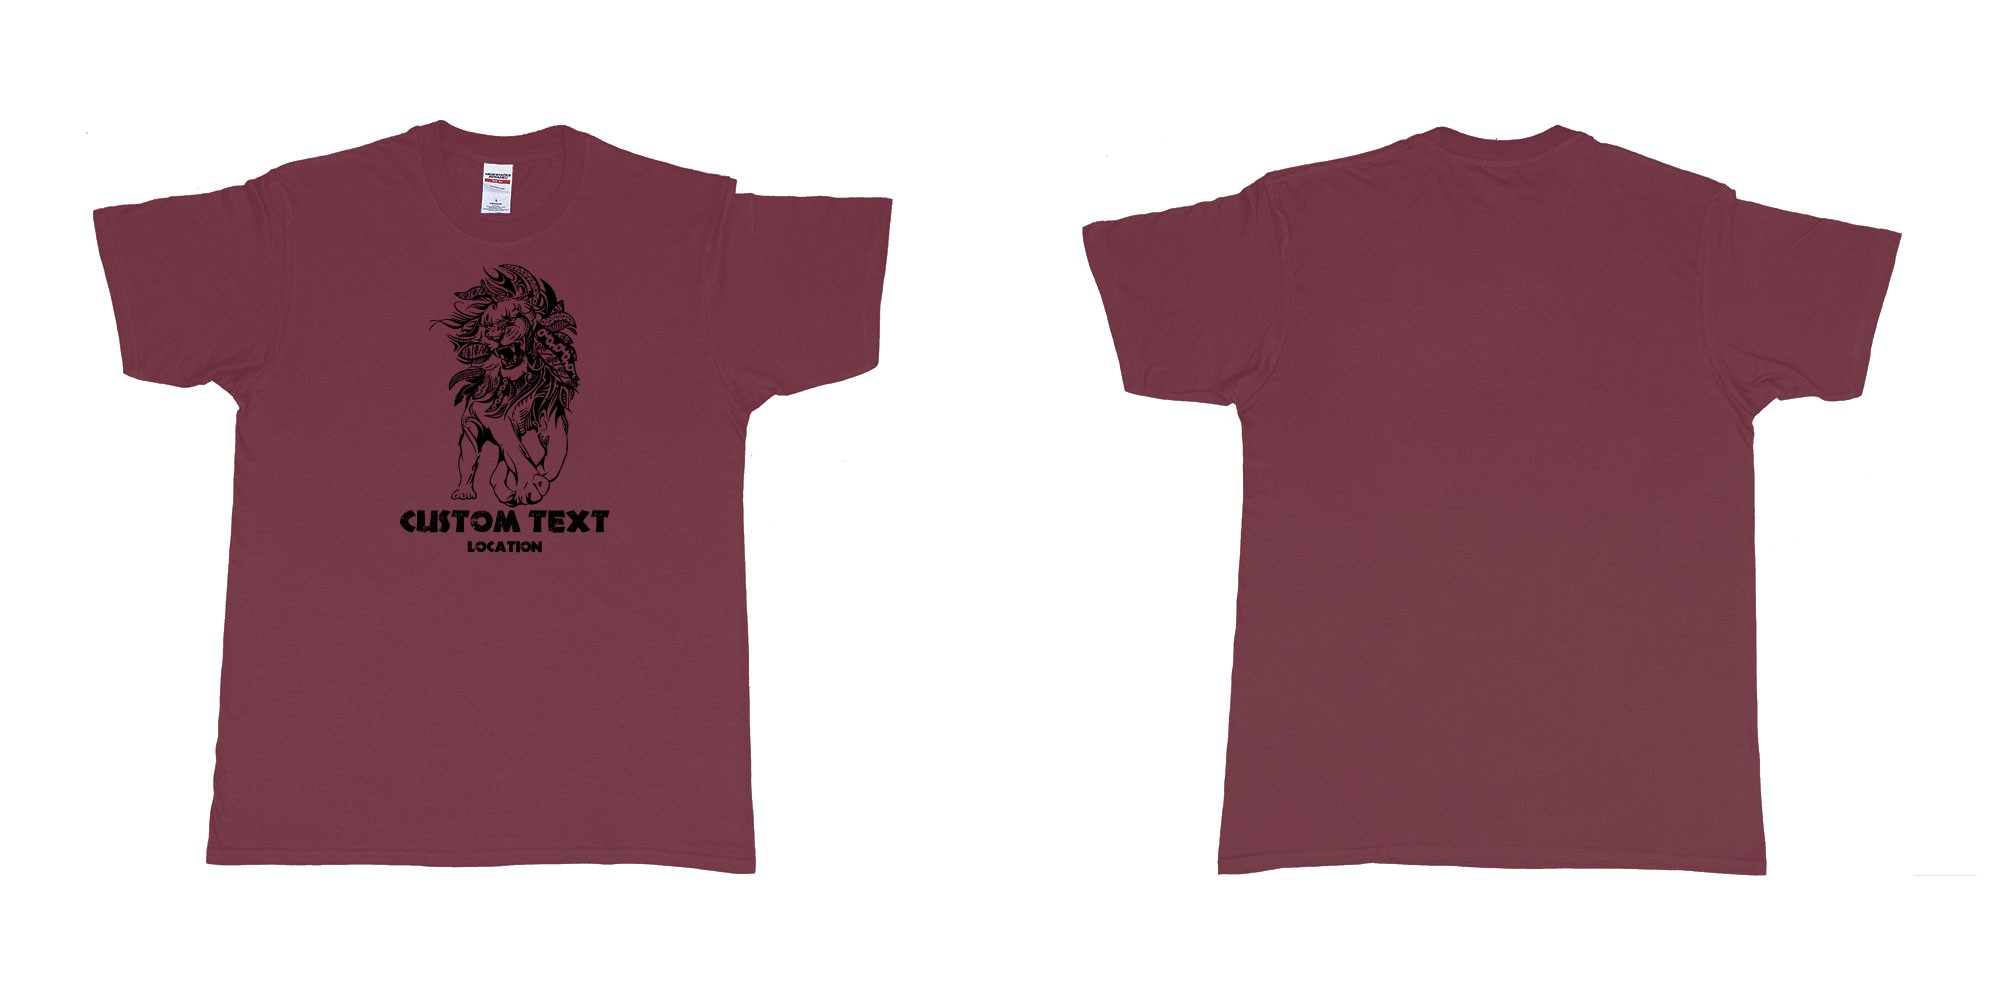 Custom tshirt design lion august tribal in fabric color marron choice your own text made in Bali by The Pirate Way